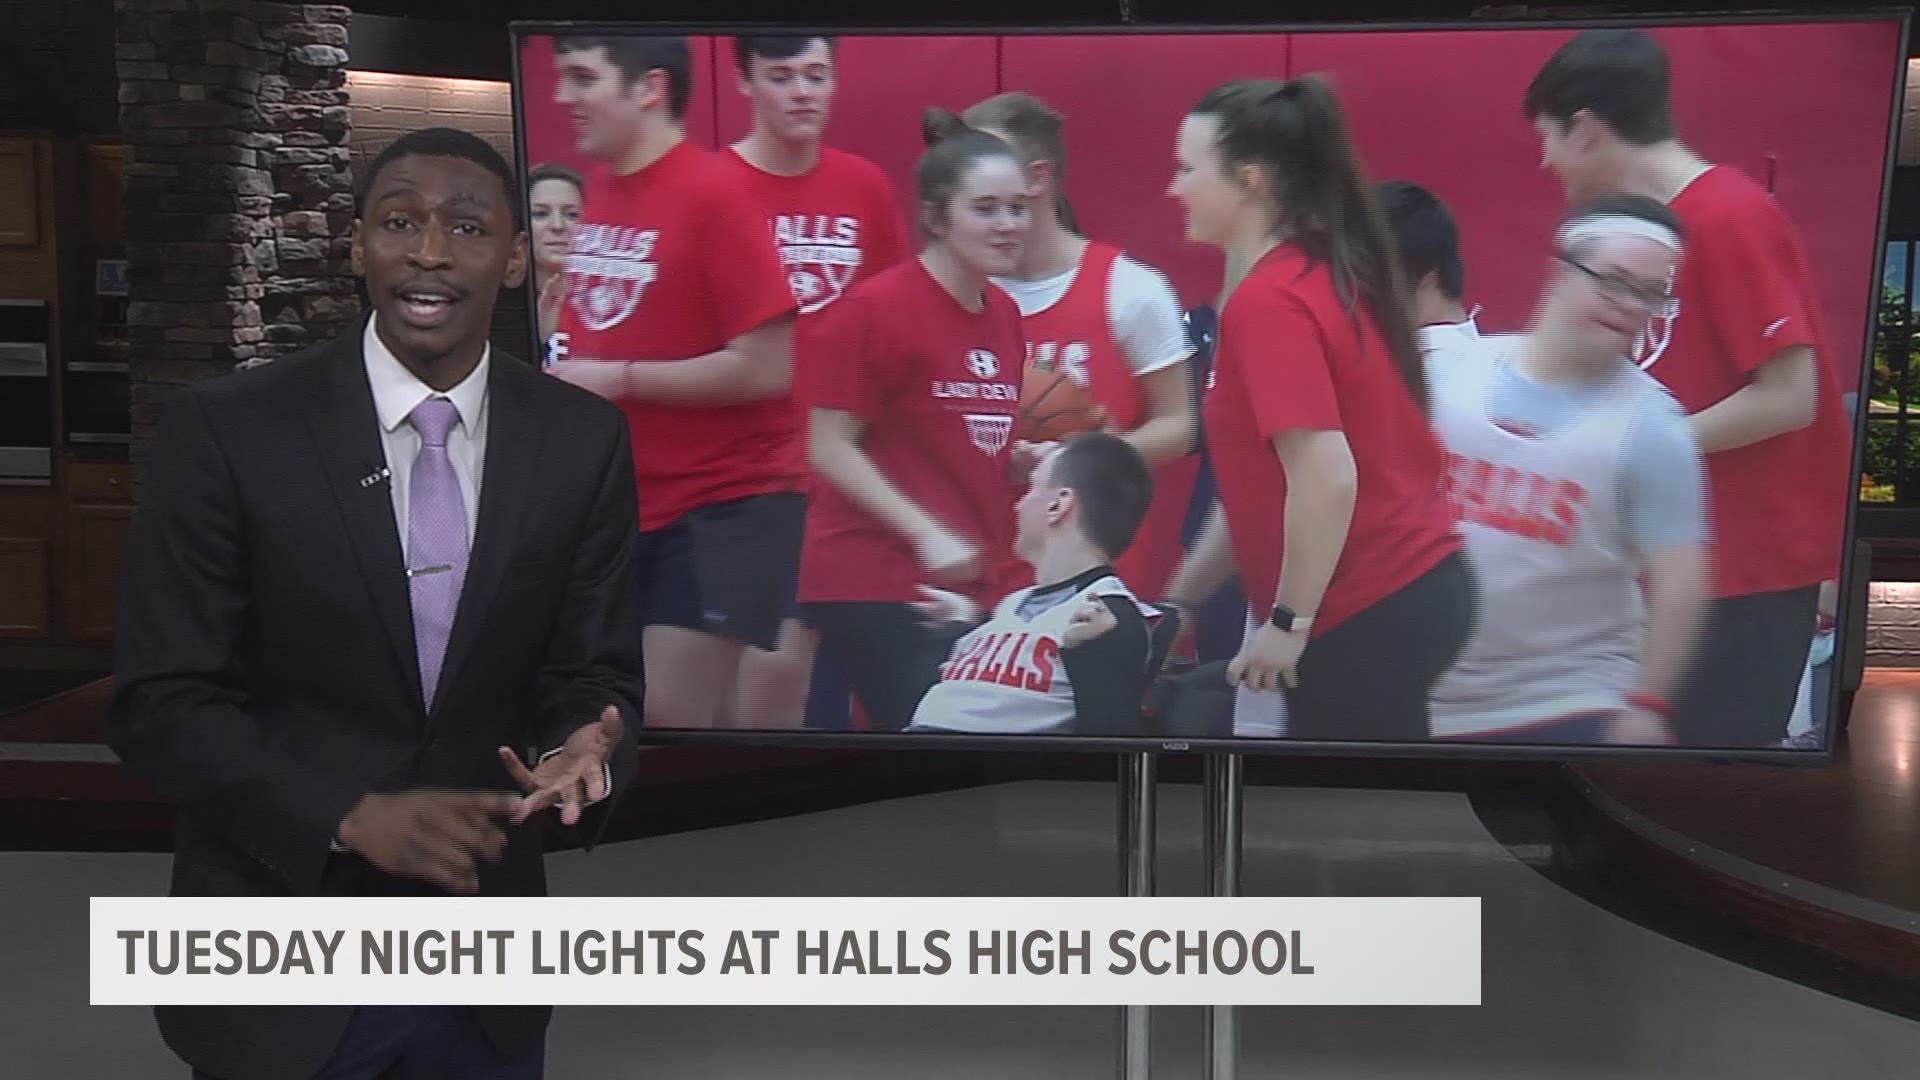 Halls High School held its first ever "Tuesday Night Lights" basketball event. The school's students with disabilities played a game of basketball in front of their family and peers.